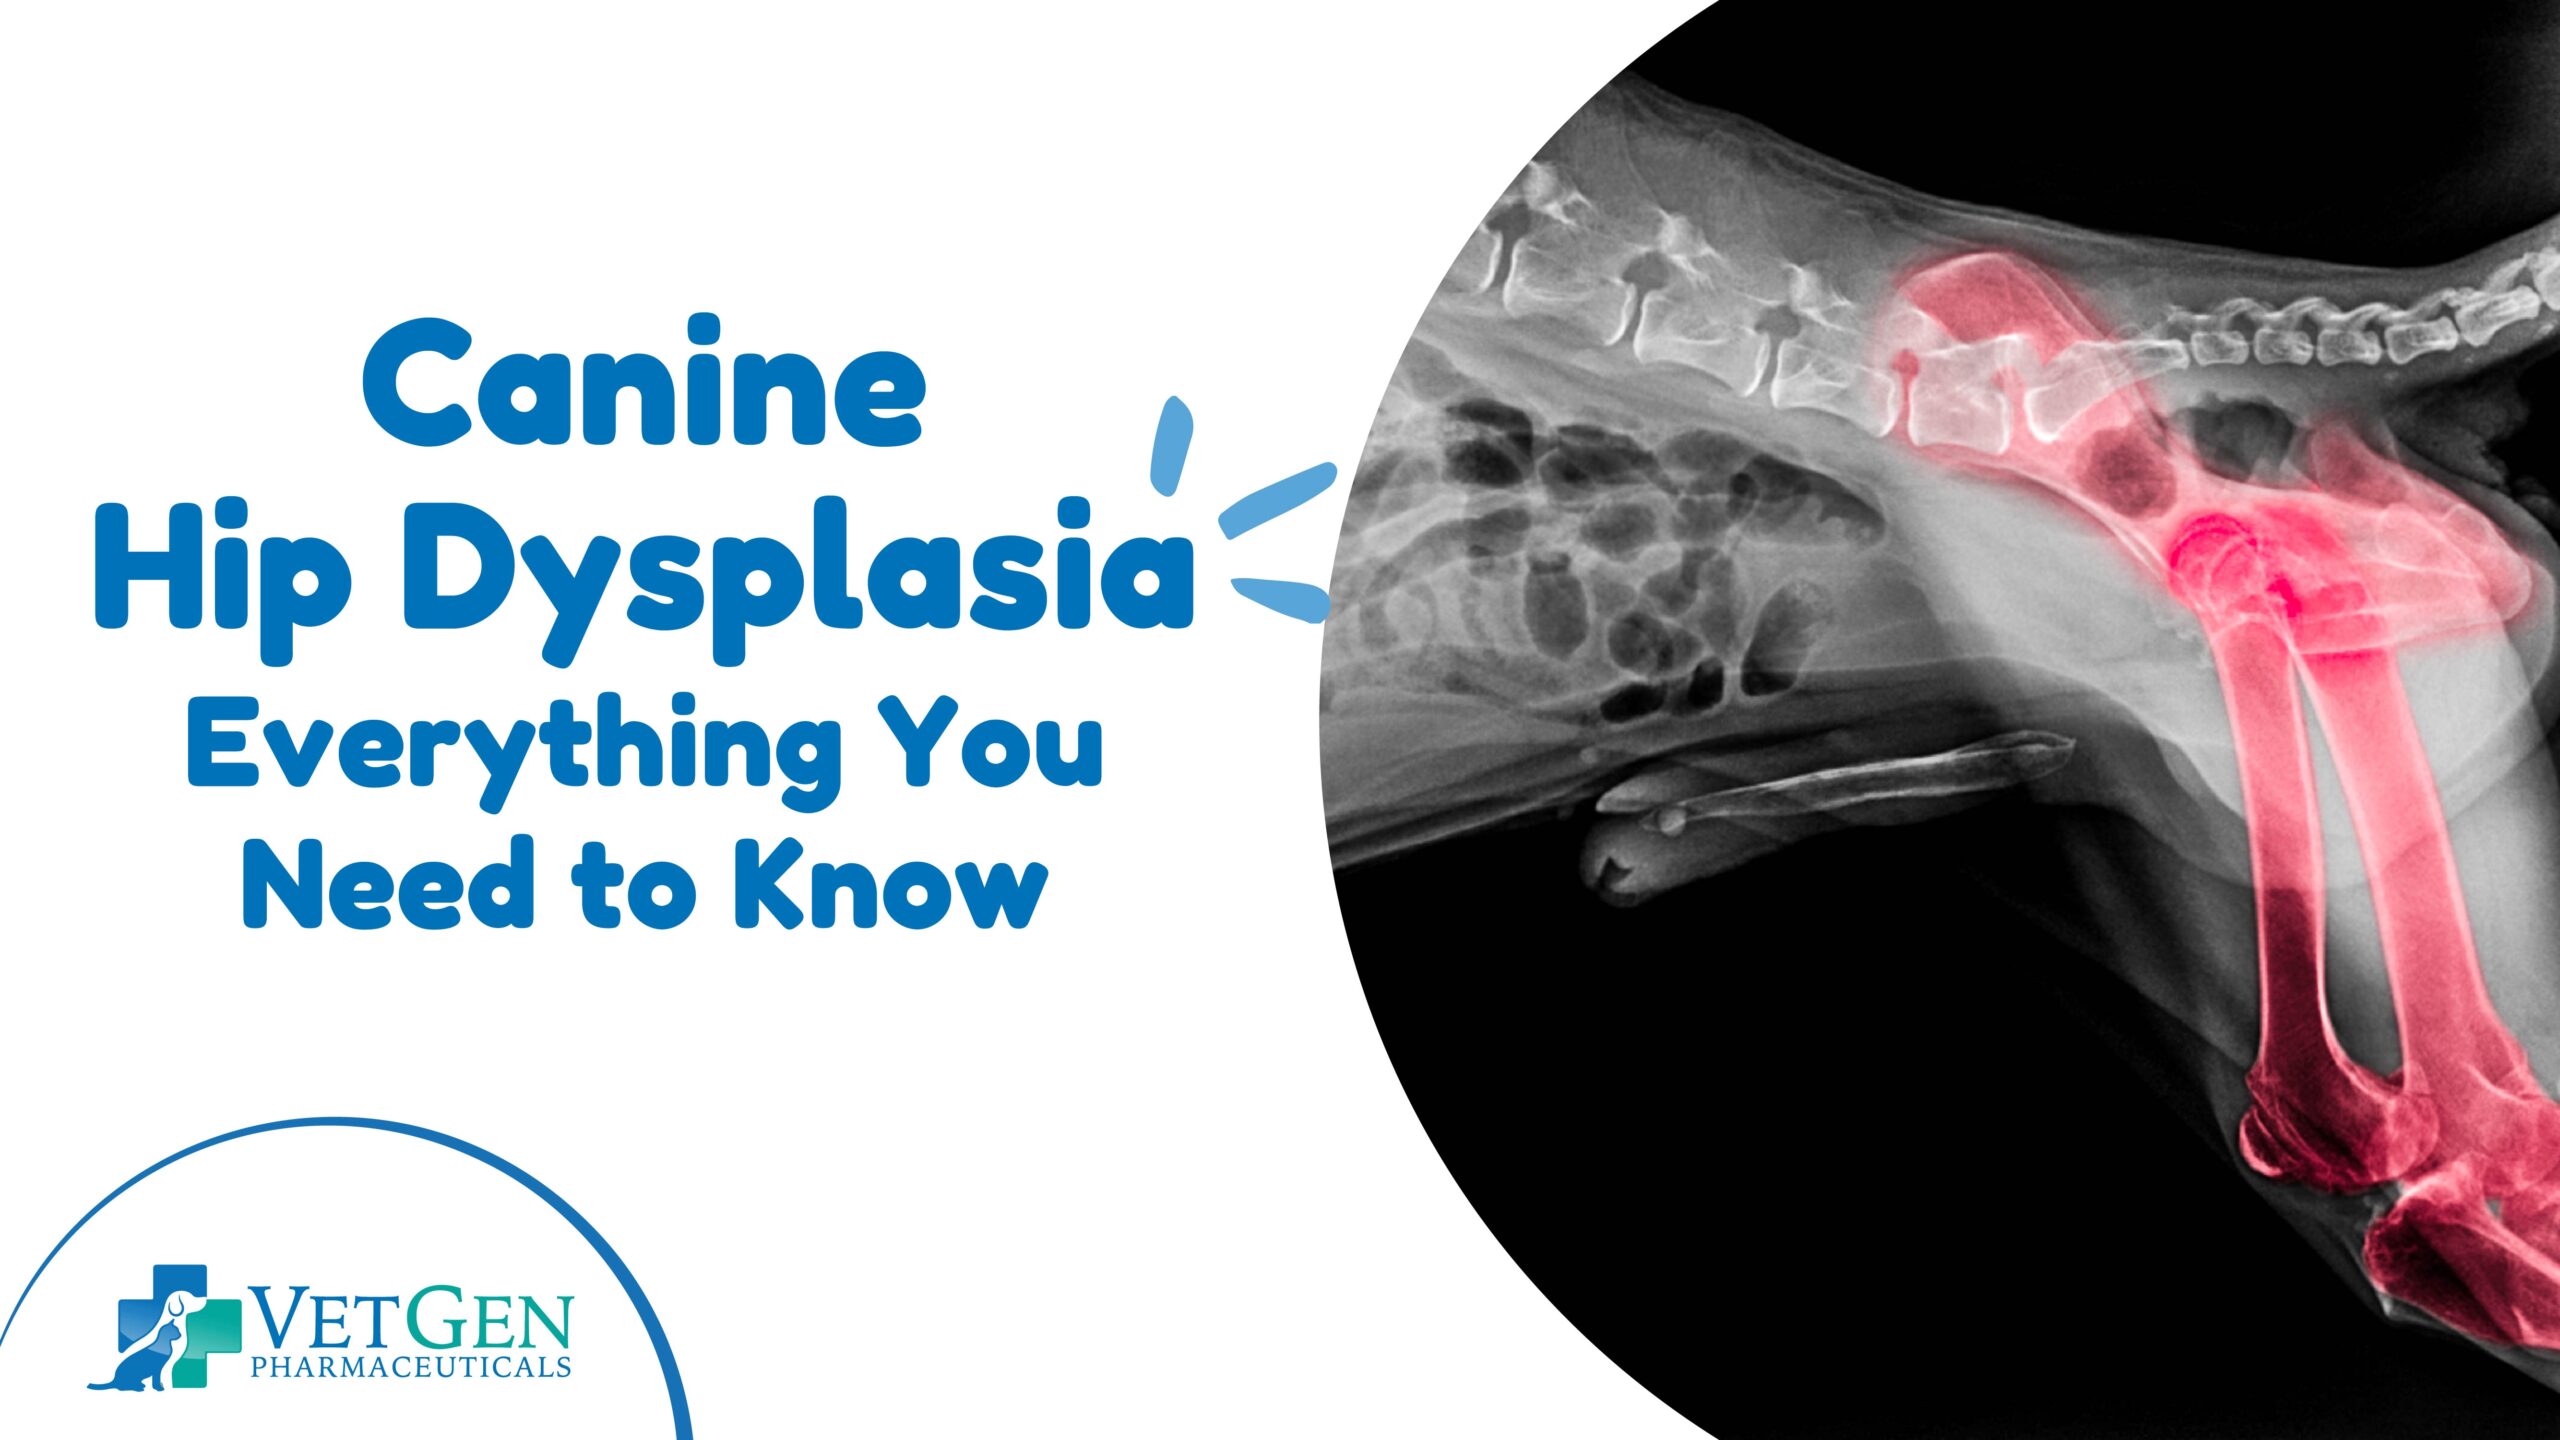 B_Canine Hip Dysplasia – Everything You Need to Know